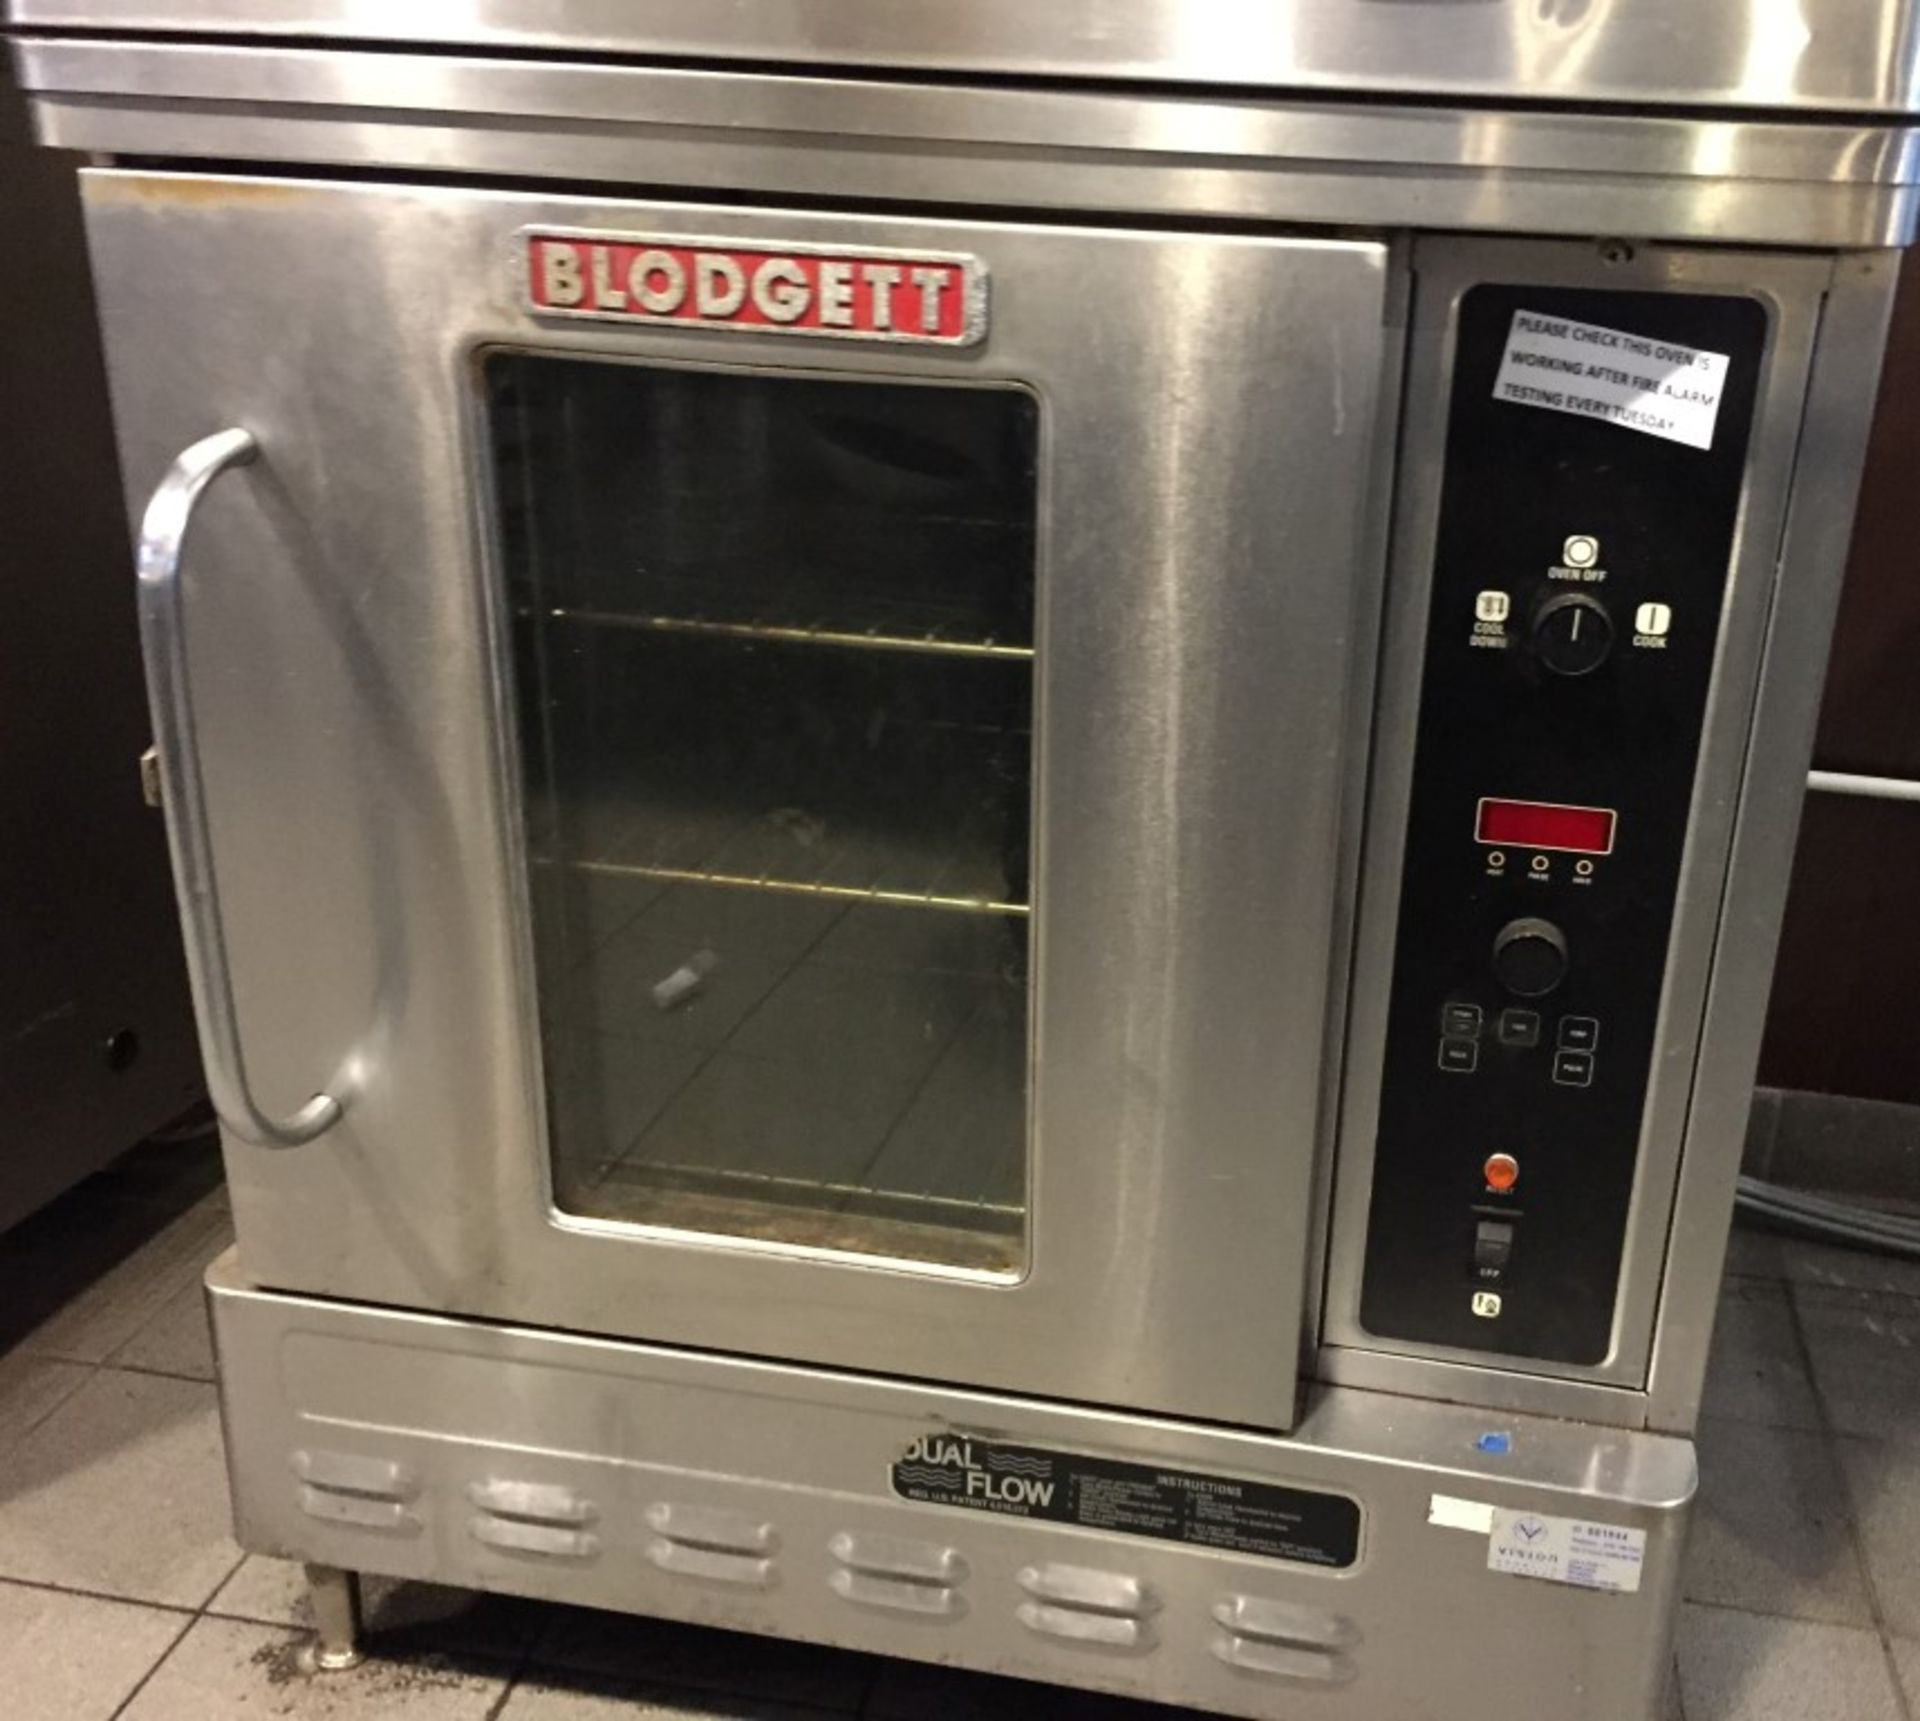 1 x Blodgett Convection Oven - Model DFG50 - Features Duel Flow, Half Size, Single Deck, Solid State - Image 6 of 7